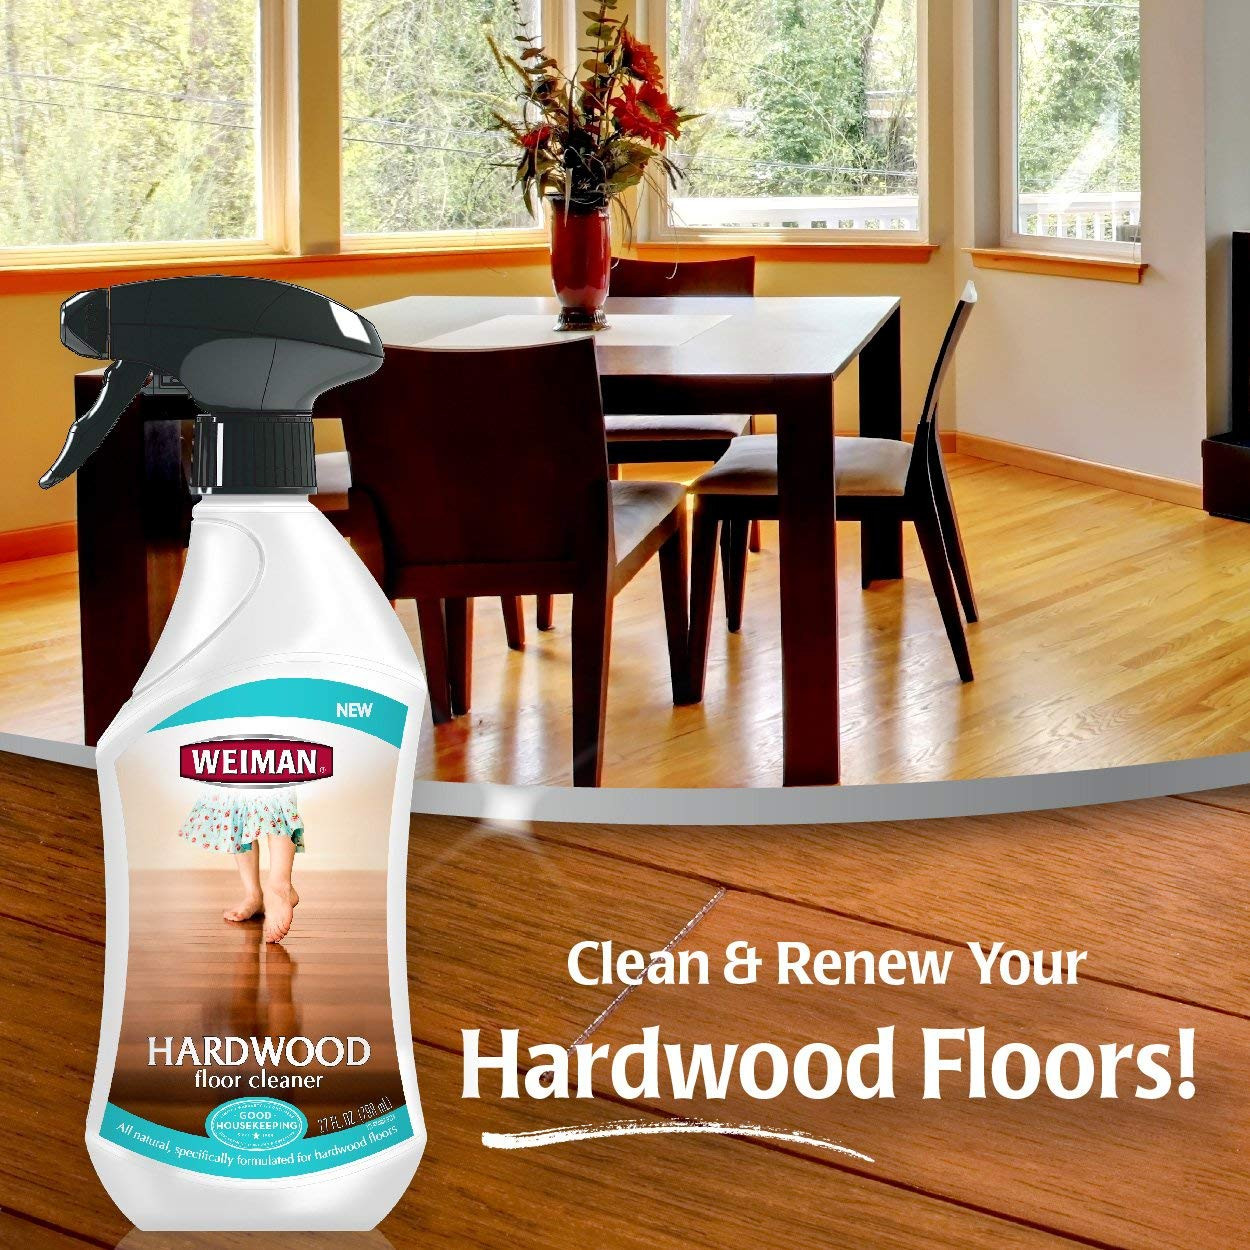 hardwood floor vacuum and cleaner of amazon com weiman hardwood floor cleaner surface safe no harsh for amazon com weiman hardwood floor cleaner surface safe no harsh scent safe for use around kids and pets residue free 27 oz trigger home kitchen